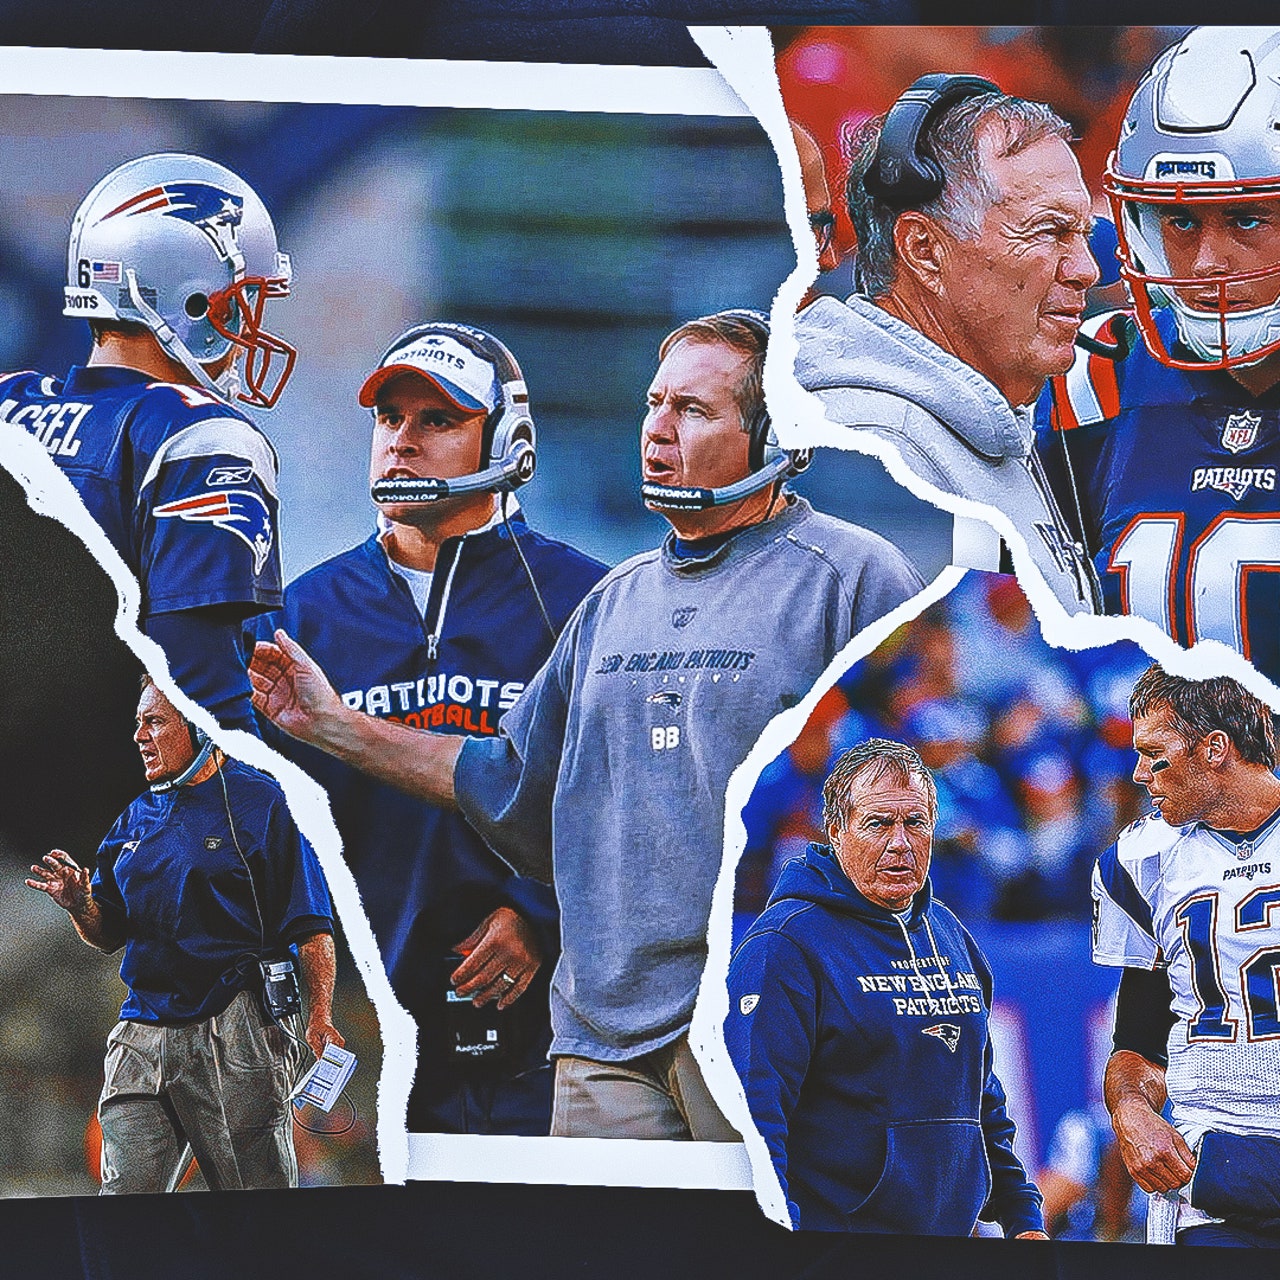 How does Bill Belichick feel about Patriots honoring Tom Brady